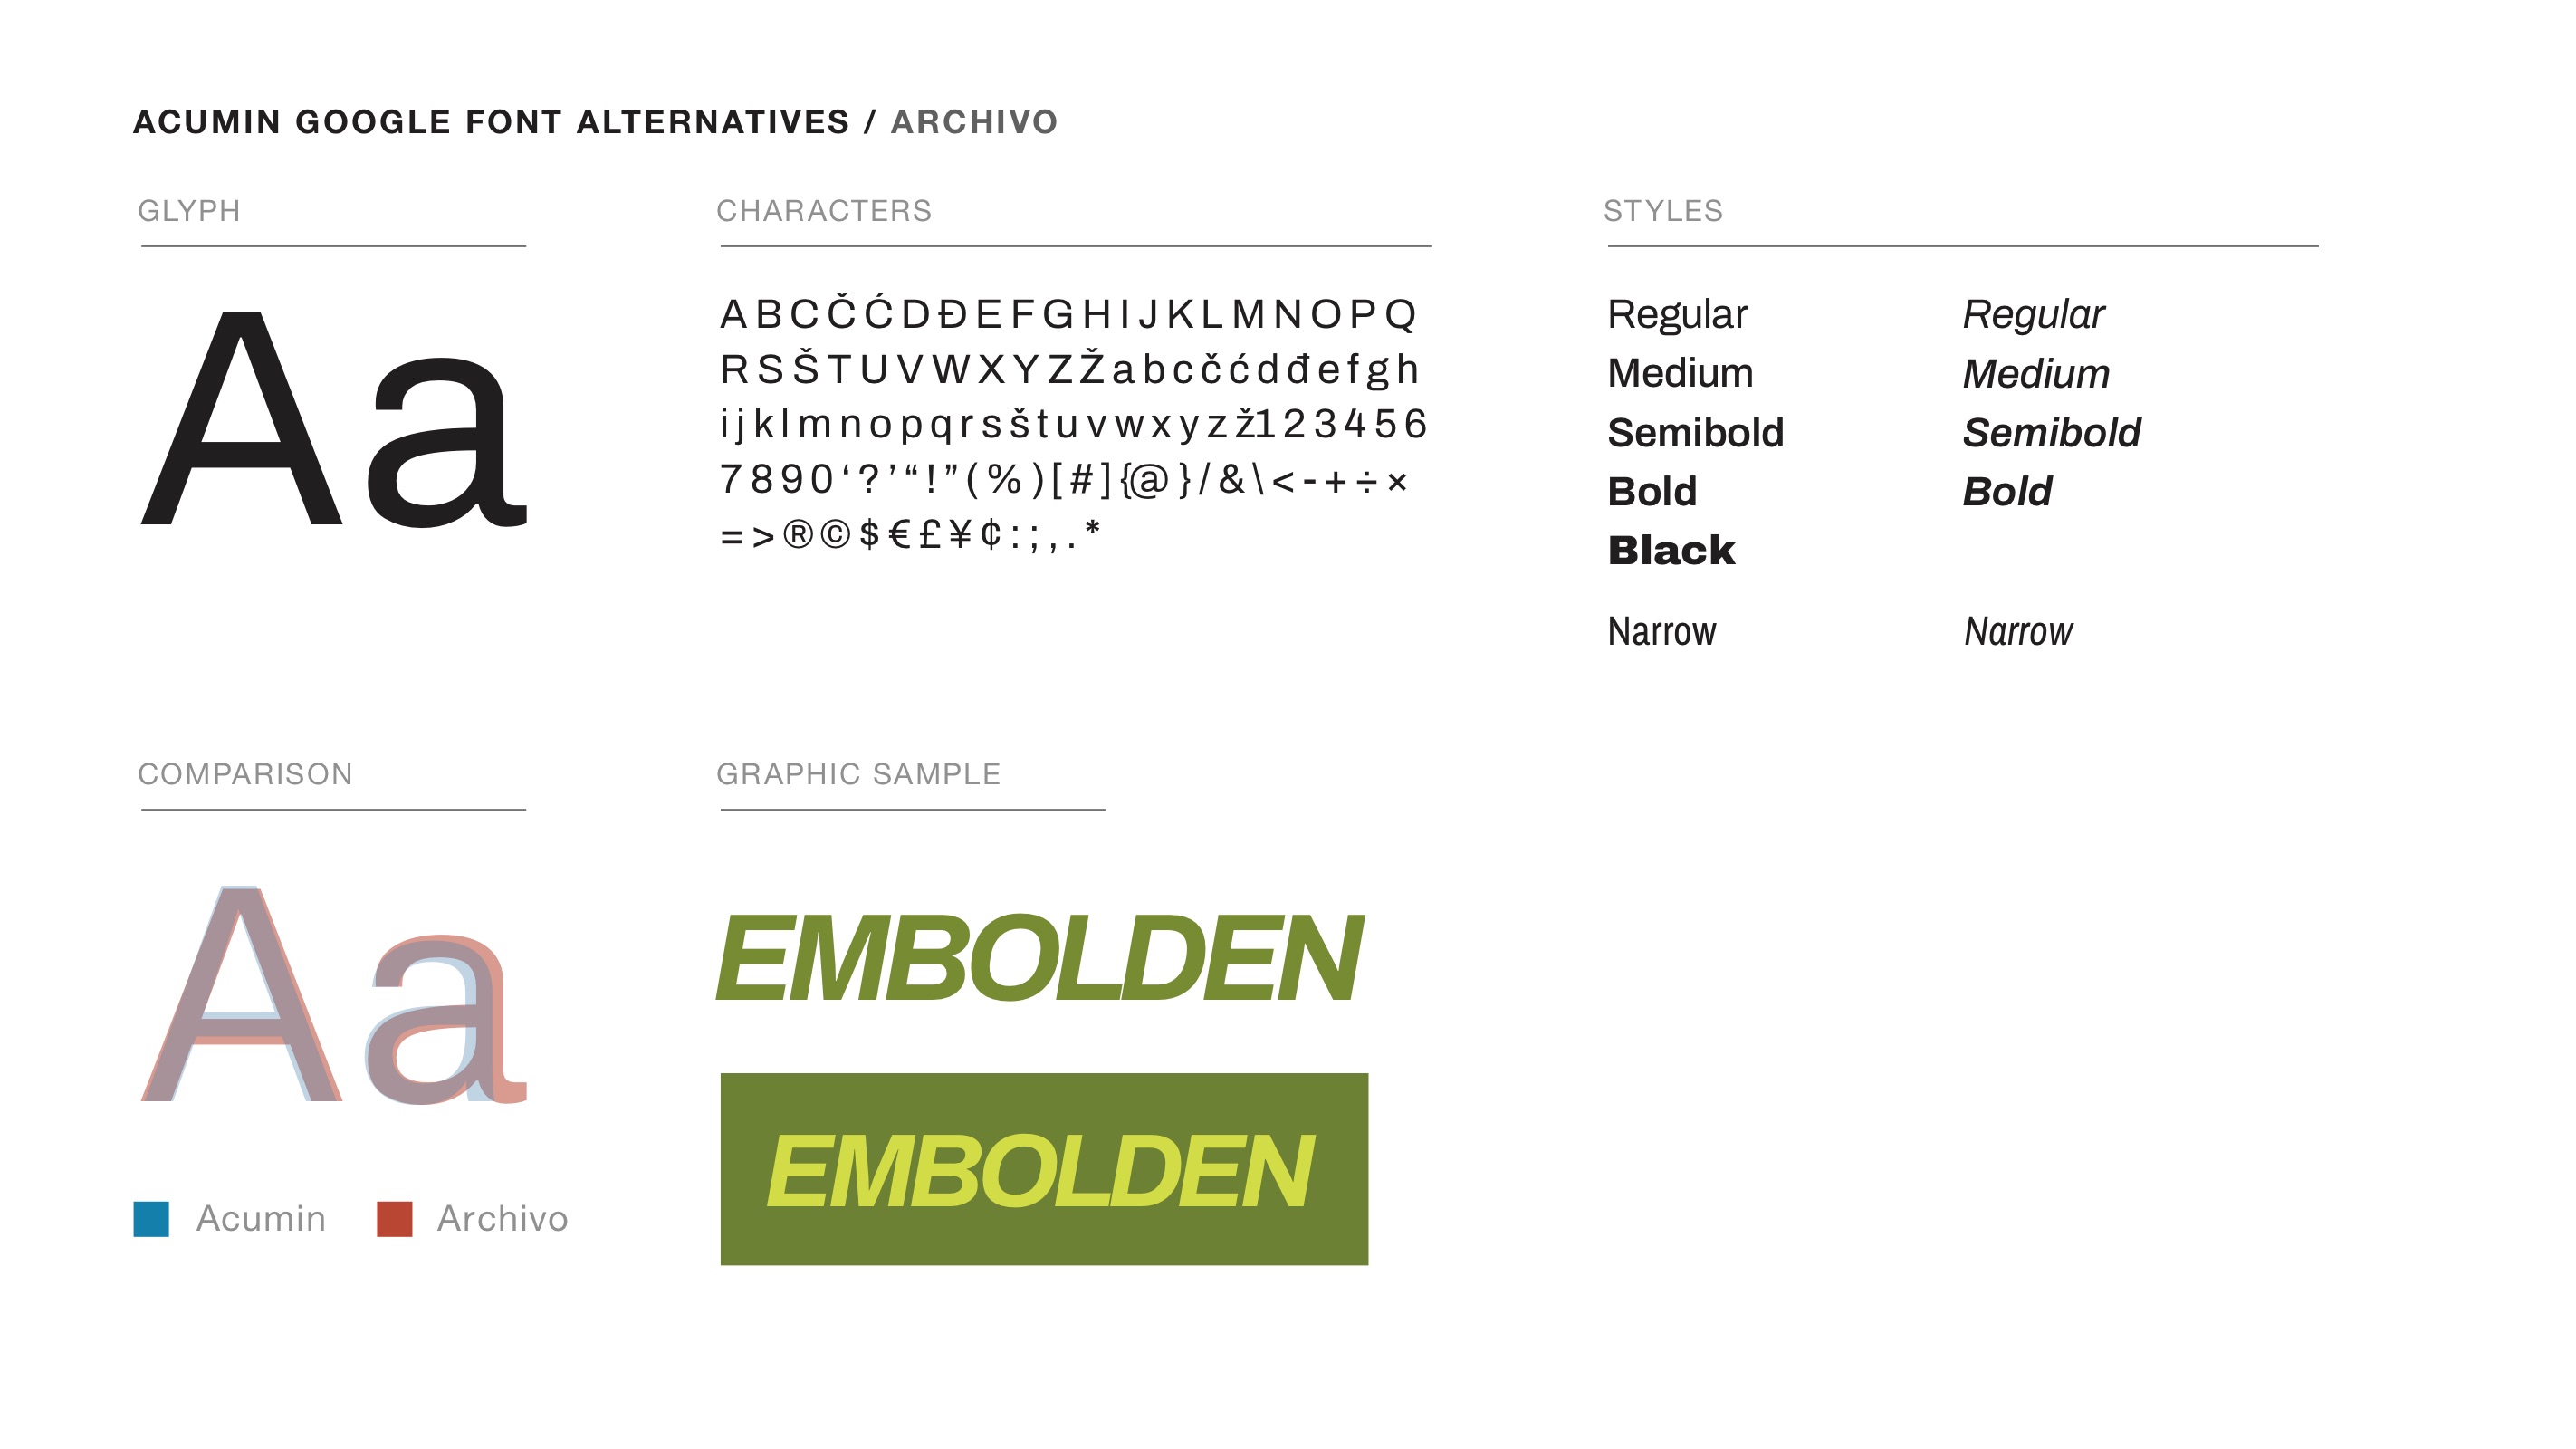 An image comparing Acumin and Archivo fonts